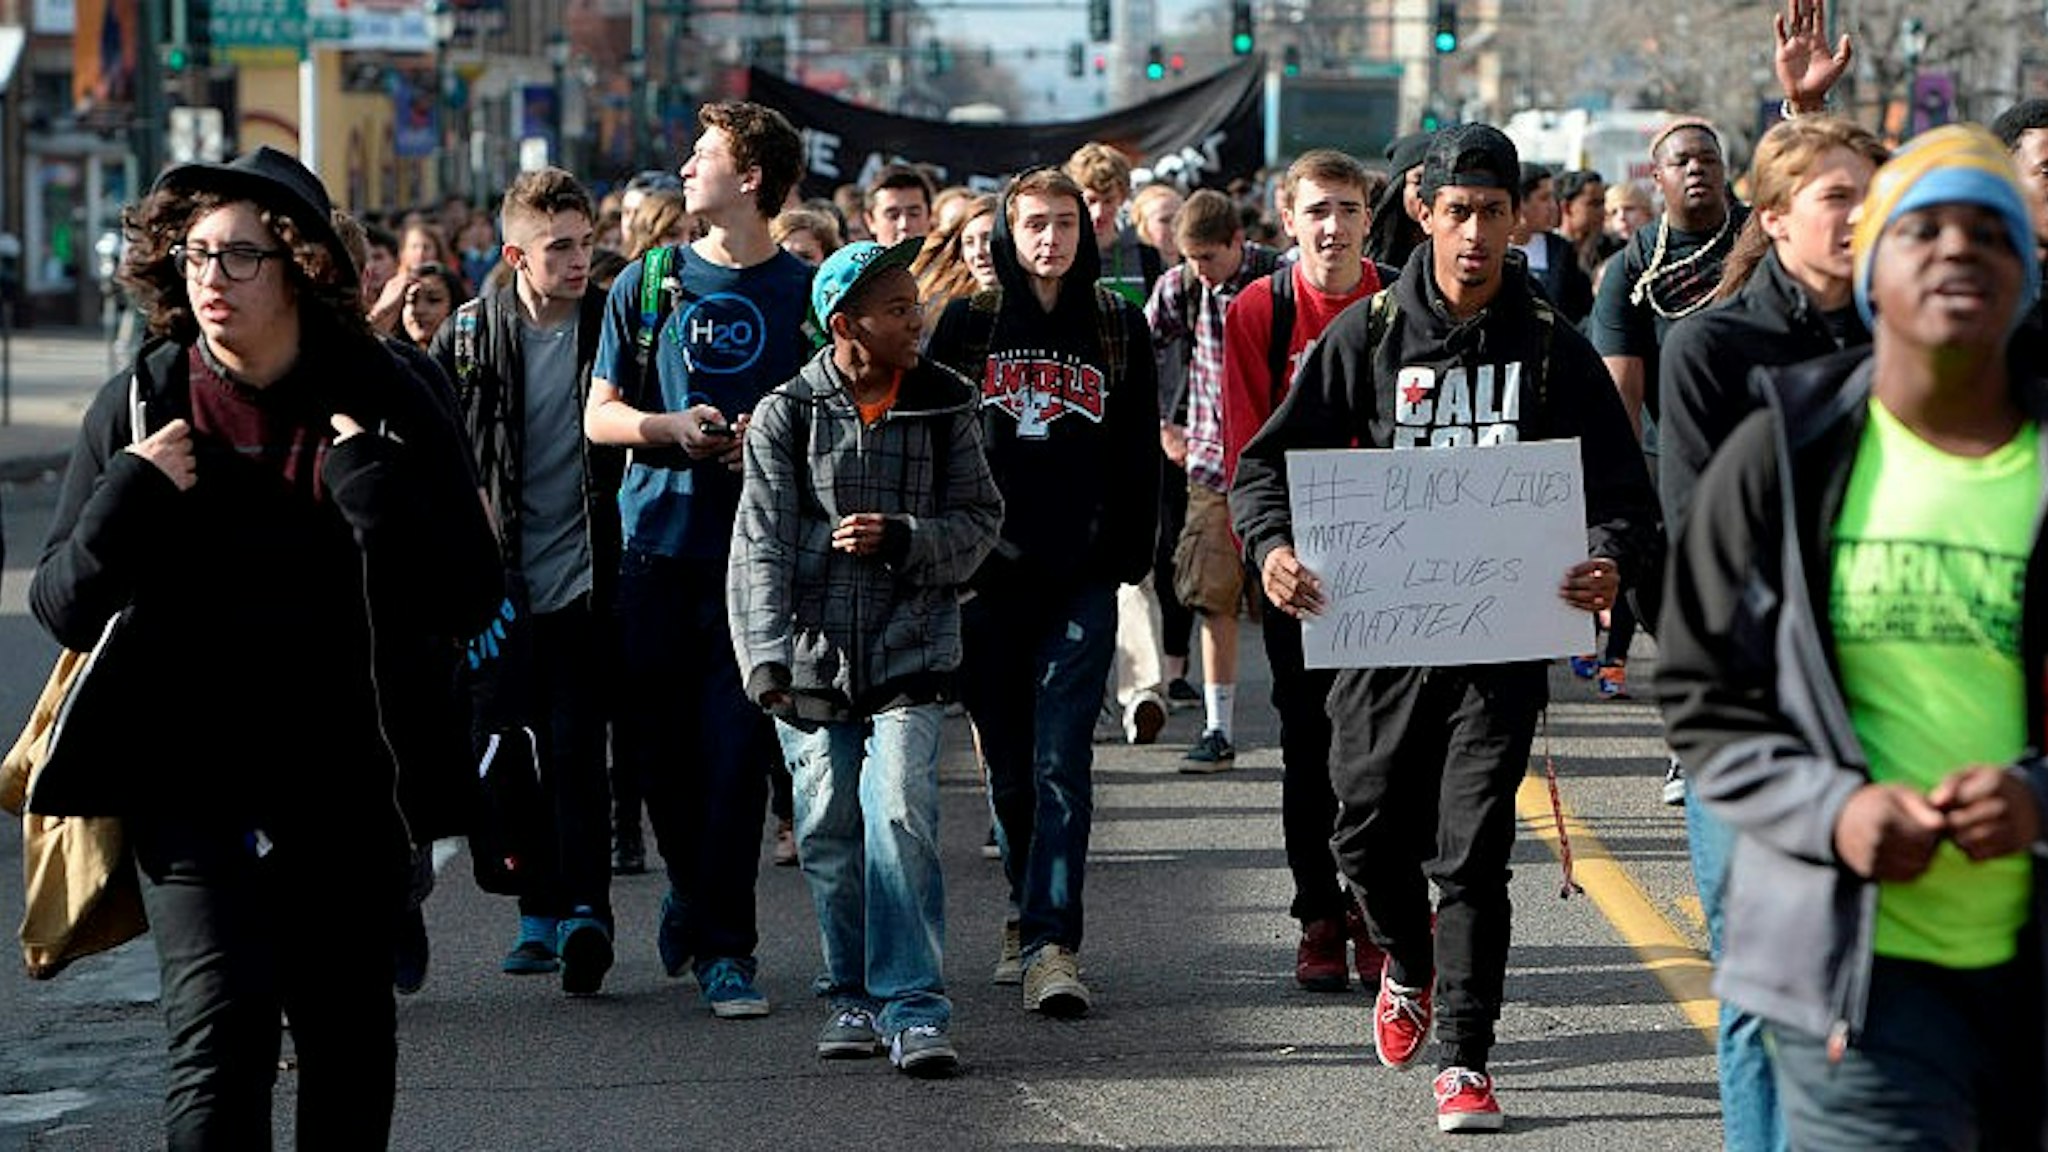 DENVER, CO - DECEMBER 03: East High School students gather and sit in the intersection of York St and Colfax Ave during a Ferguson walkout and protest only a few block east of where four Denver Police officers on bicycles were hit by a vehicle traveling west on Colfax. All of the officers were transported to Denver Health Medical center December 03, 2014 with unknown conditions. (Photo b